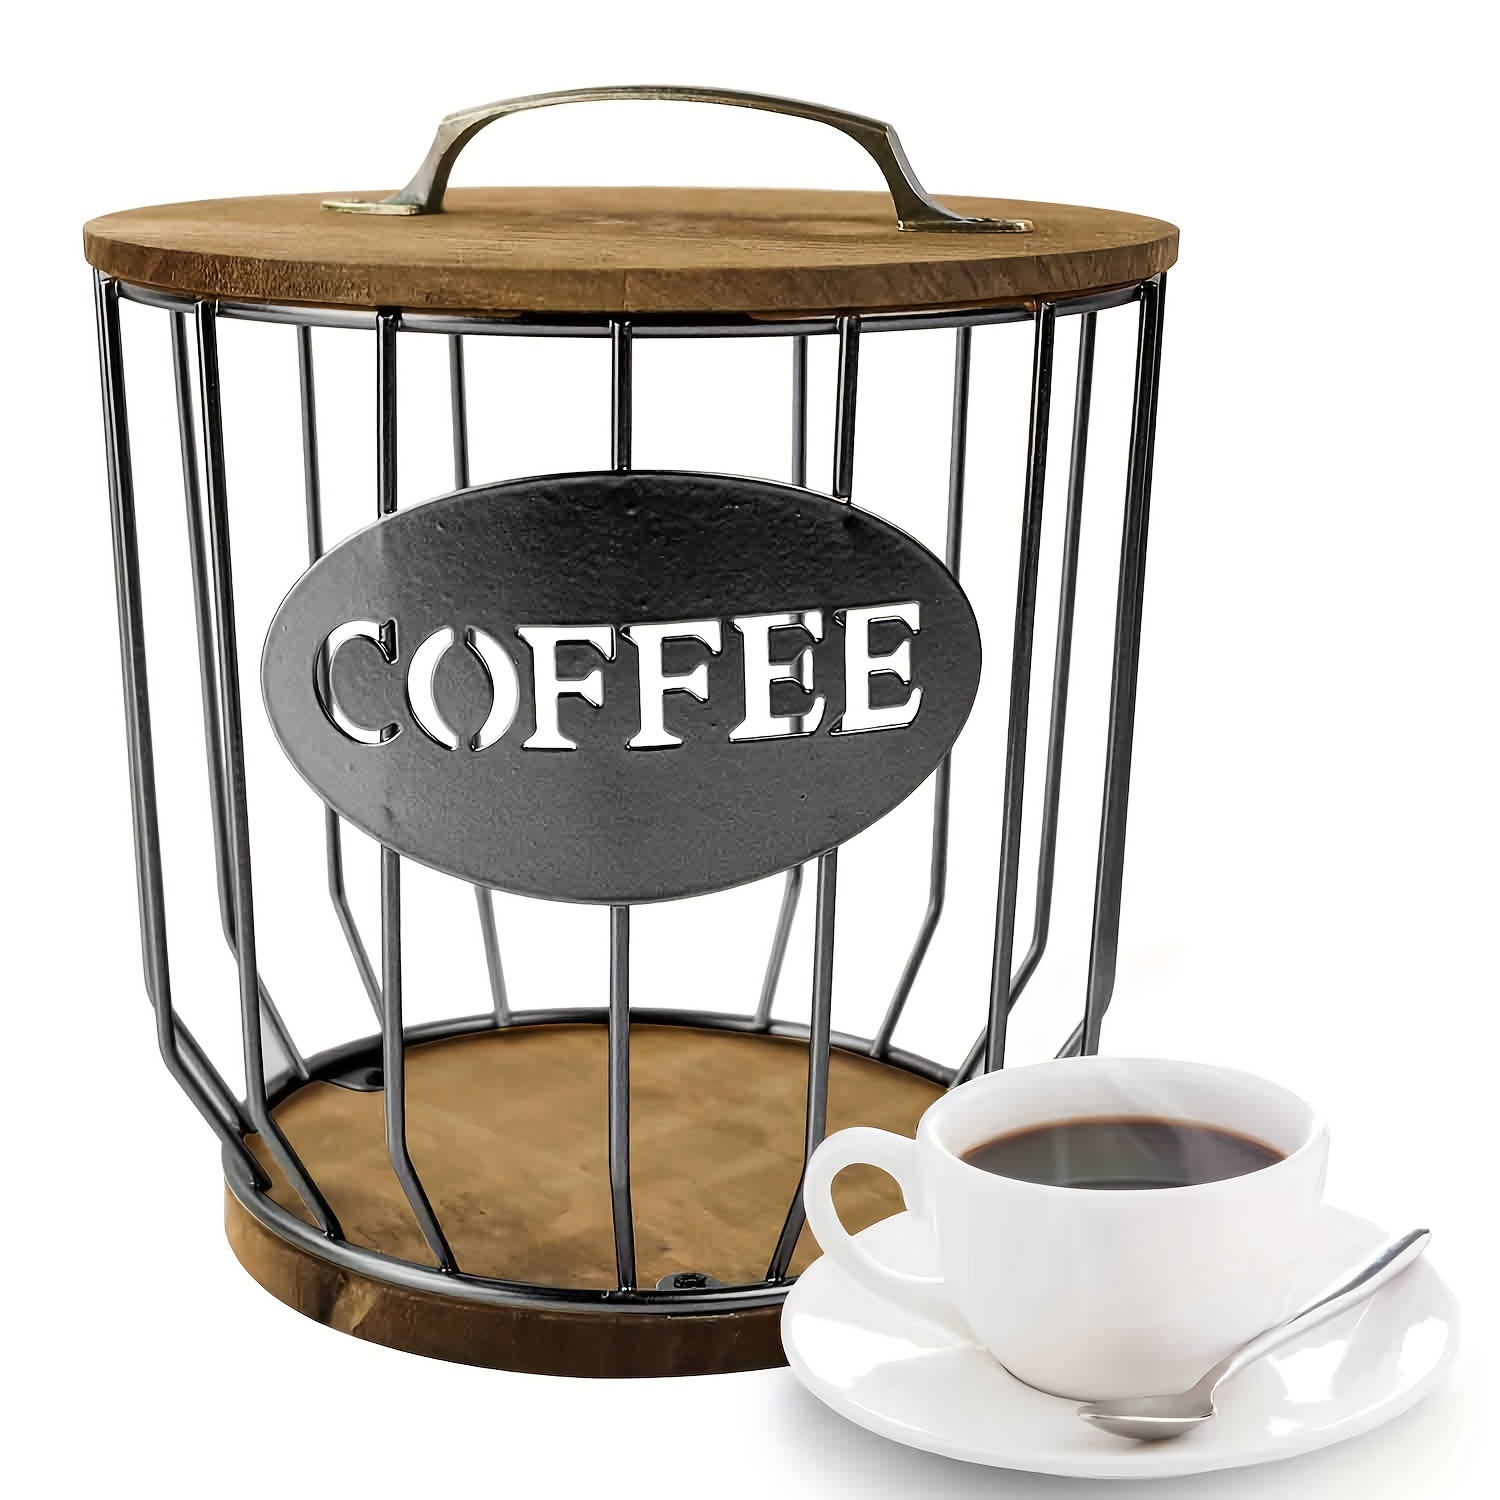 

1pc Coffee Pod Holder, Large Capacity Black Wire Storage Basket With Wooden Base, Modern Coffee Basket Decor For Kitchen Countertop For Pods & Espresso Capsules